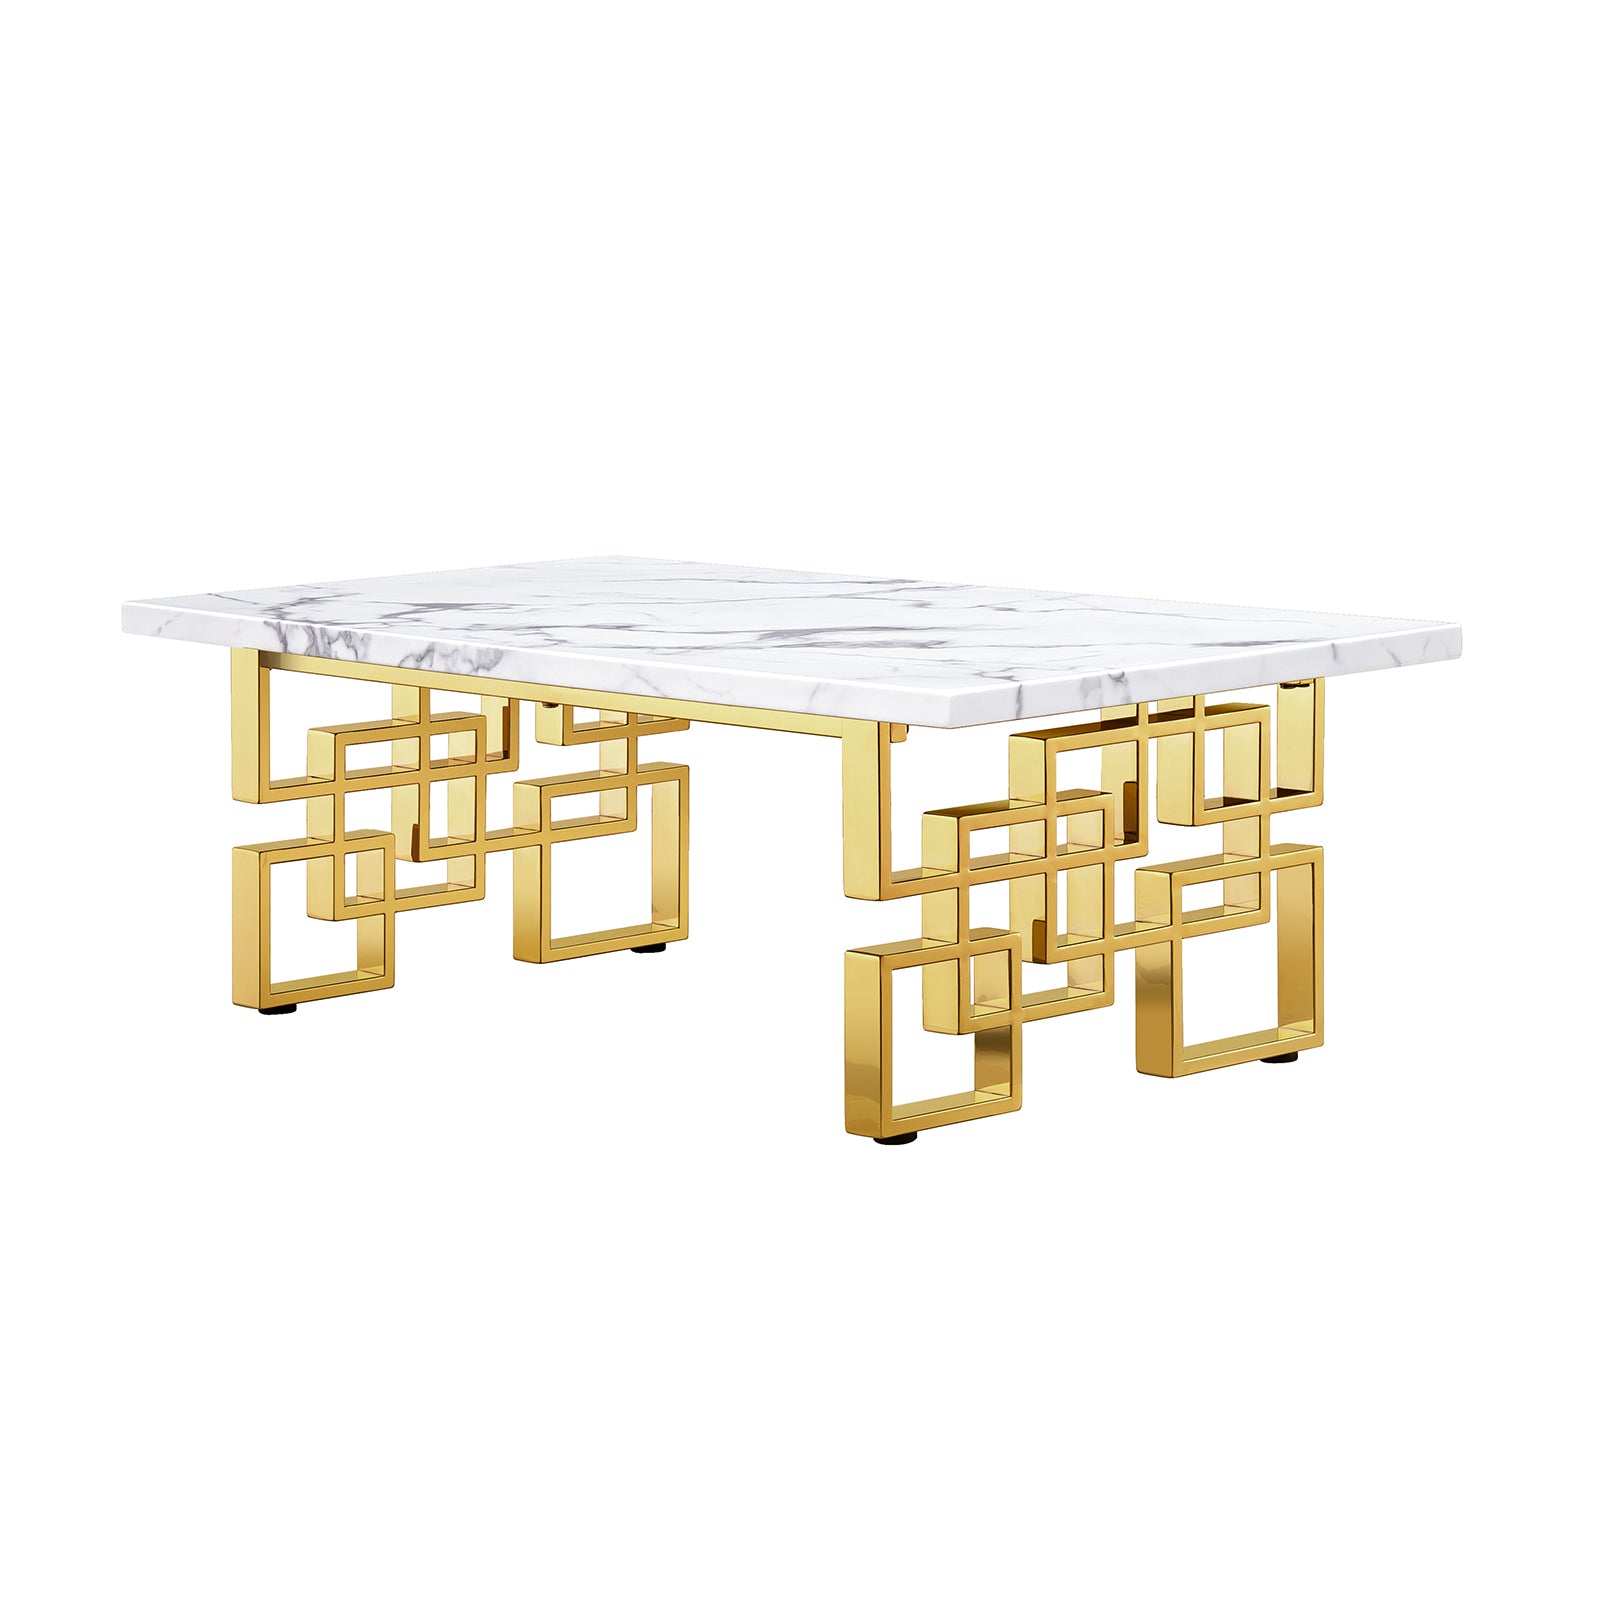 Introducing the Captivating AUZ gold Coffee Table for Your Luxurious Living Room